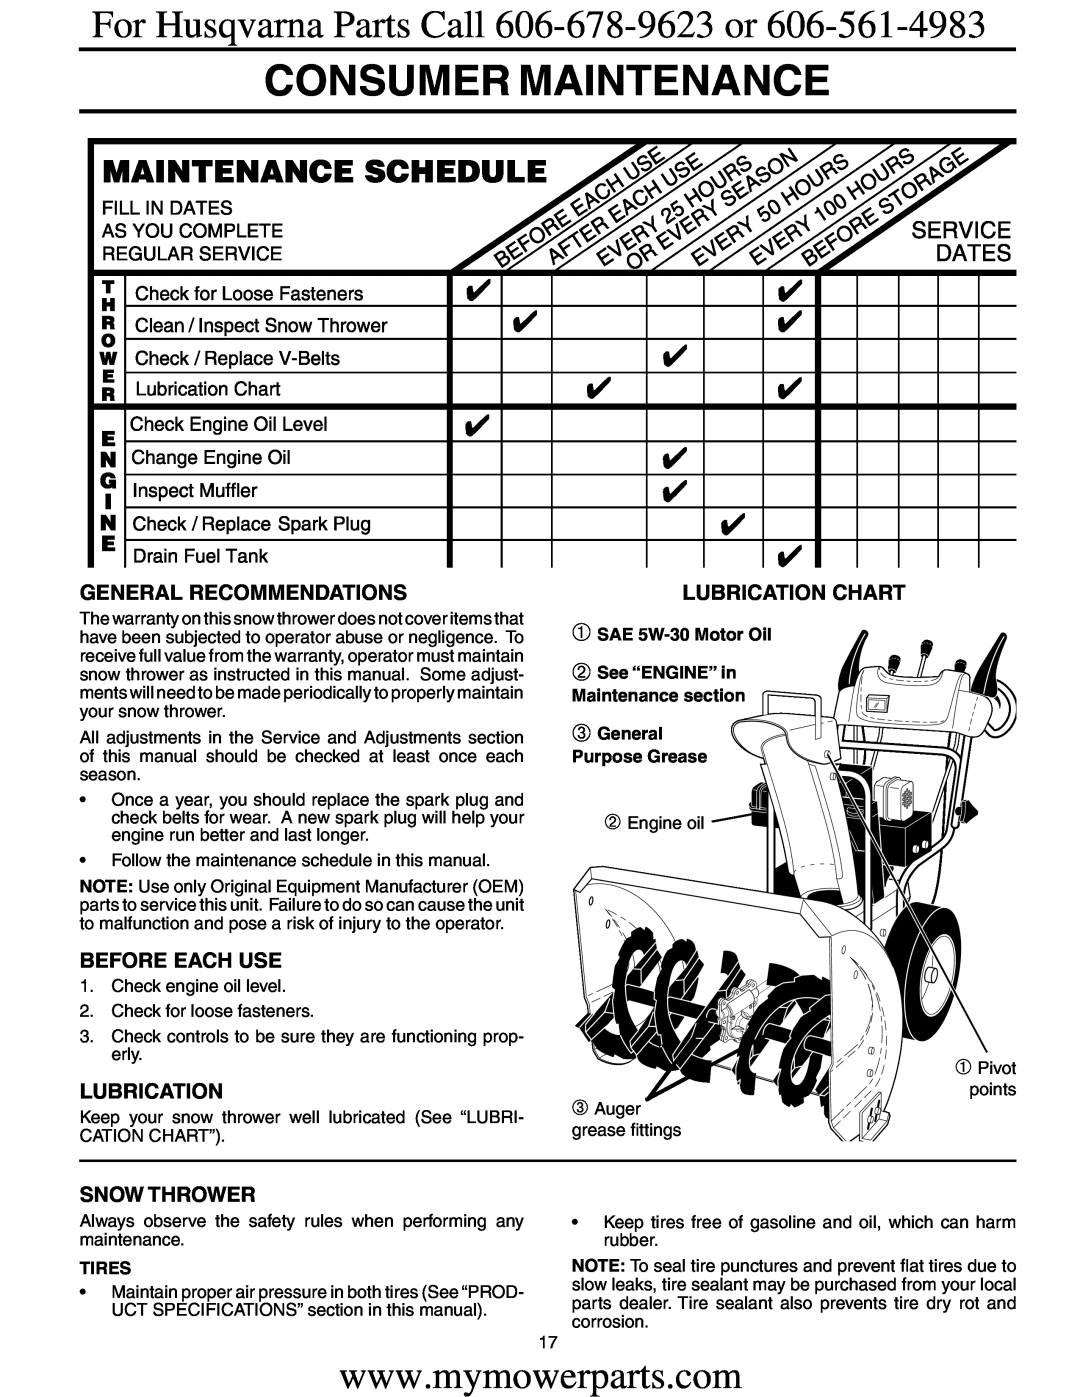 Electrolux OHV Consumer Maintenance, For Husqvarna Parts Call 606-678-9623 or, General Recommendations, Before Each Use 